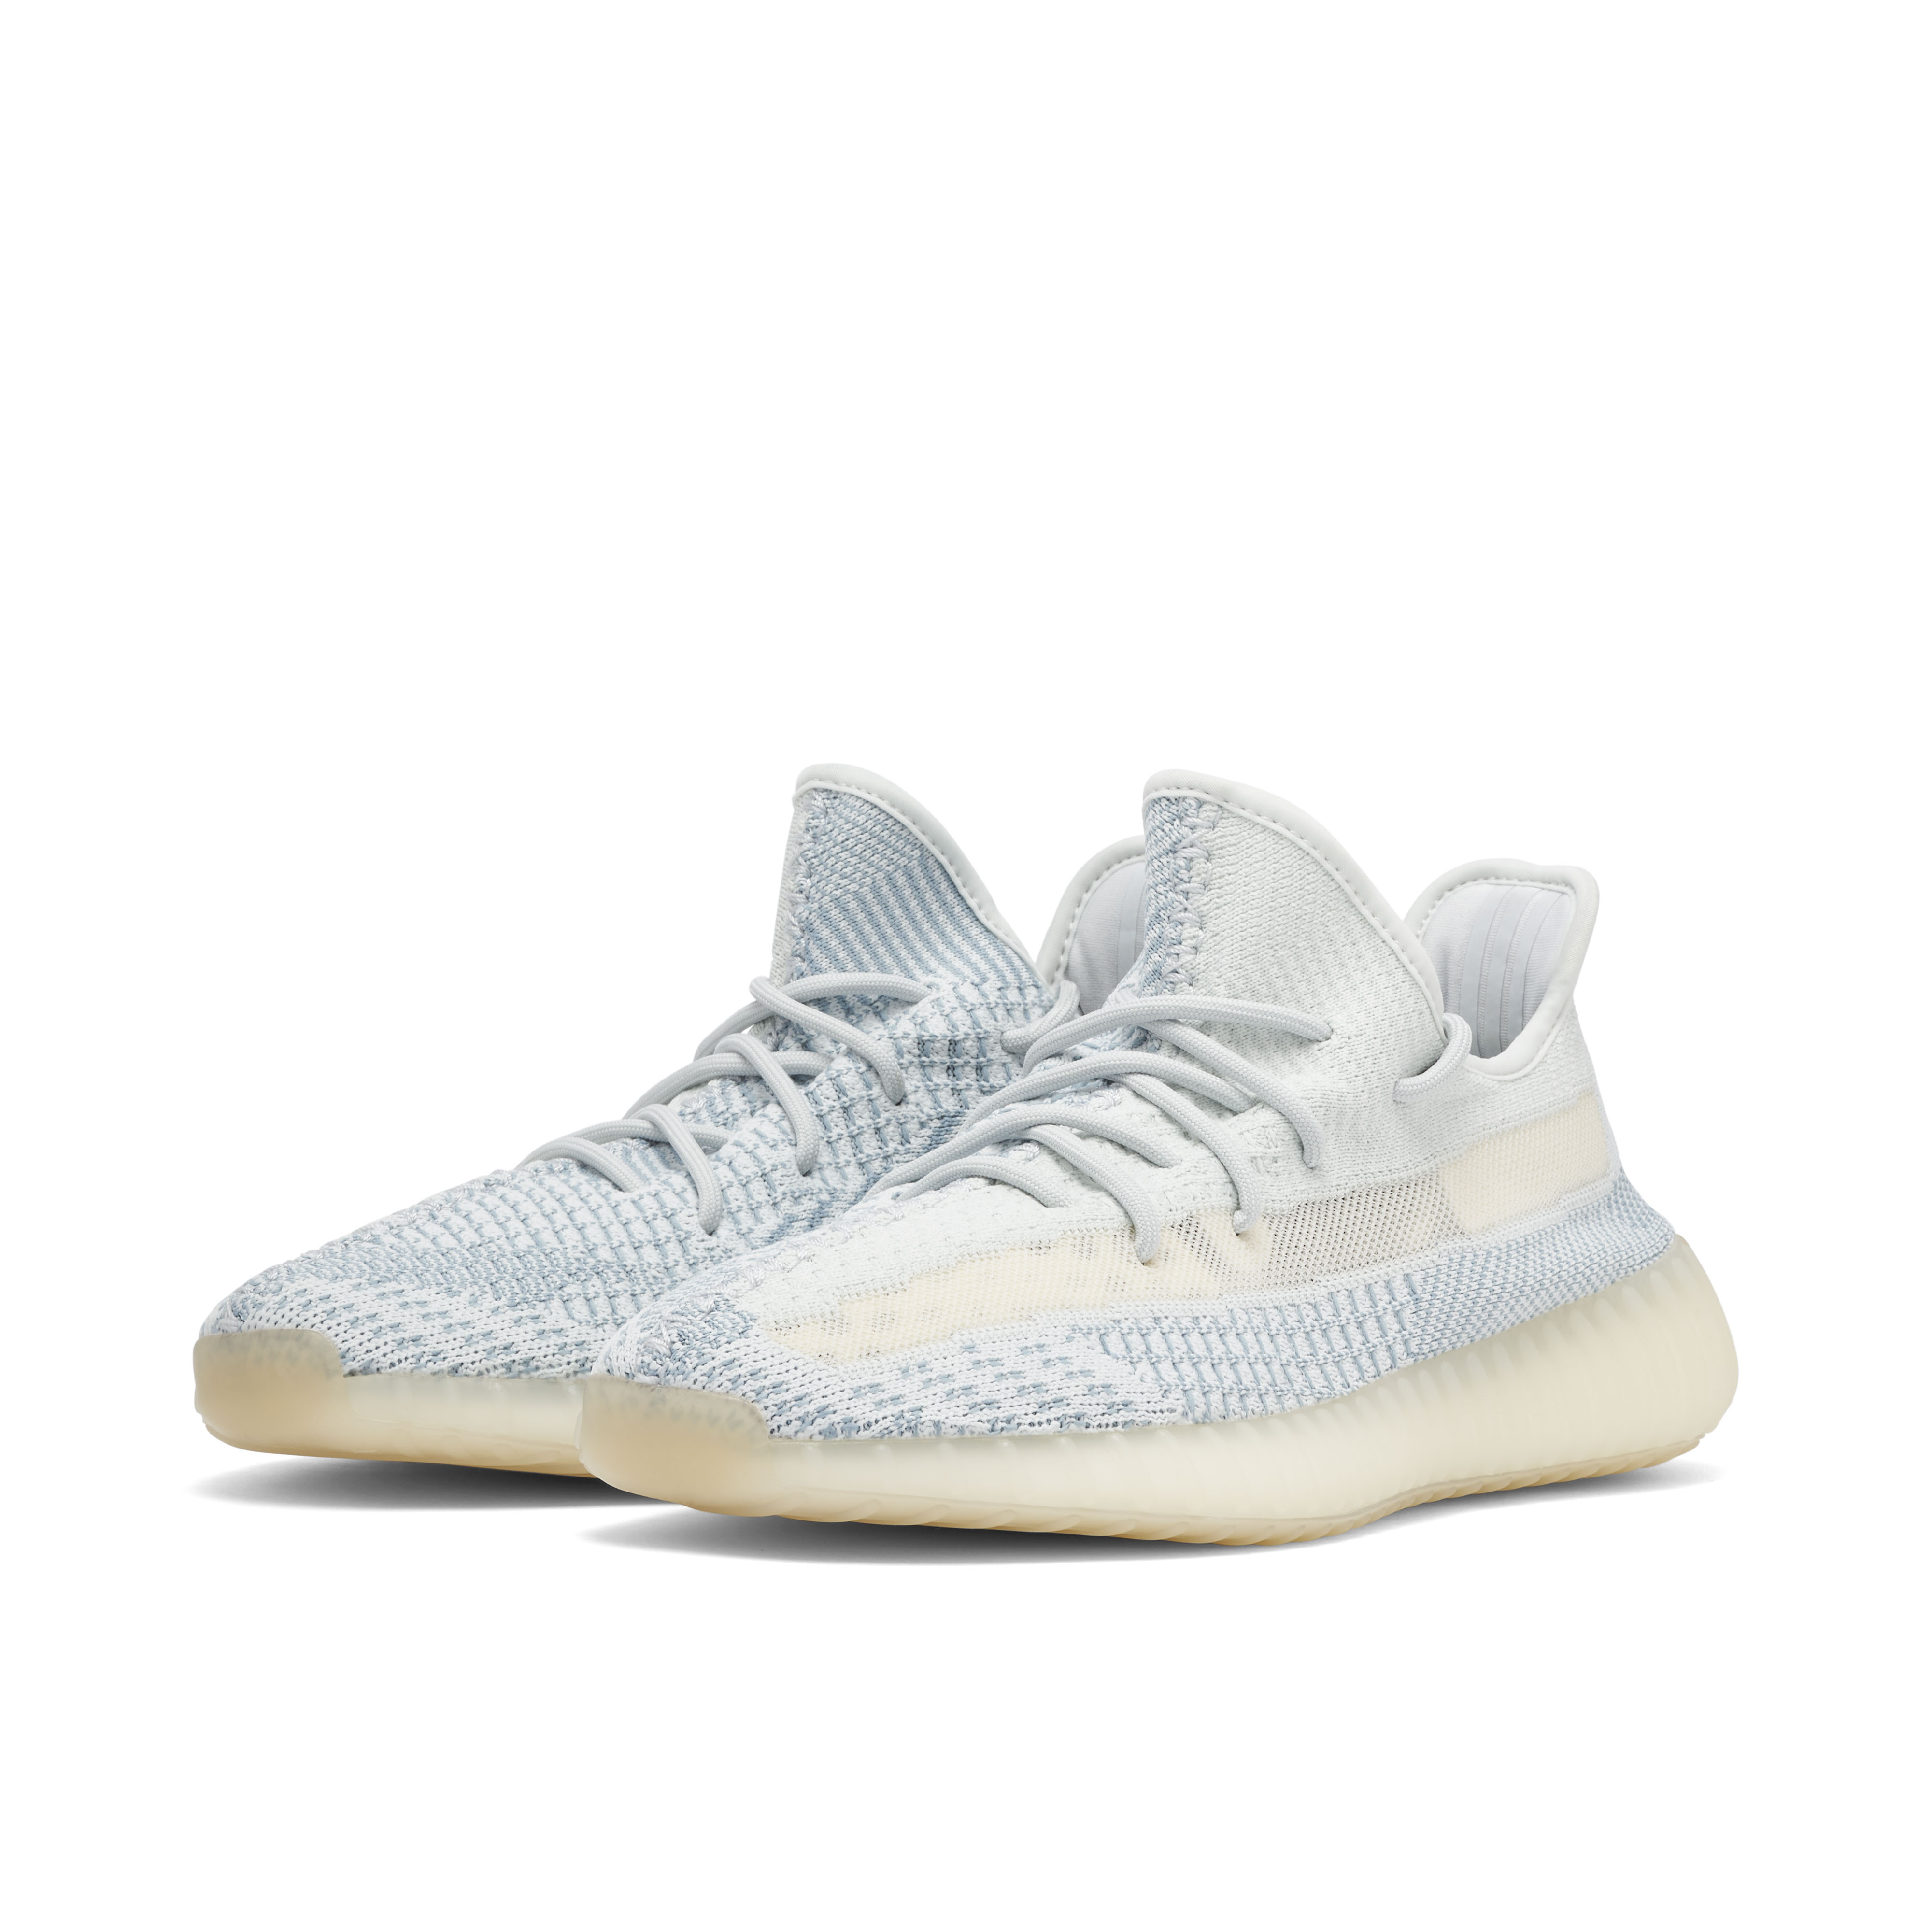 YEEZY BOOST 350 V2 CLOUD WHITE  24.5